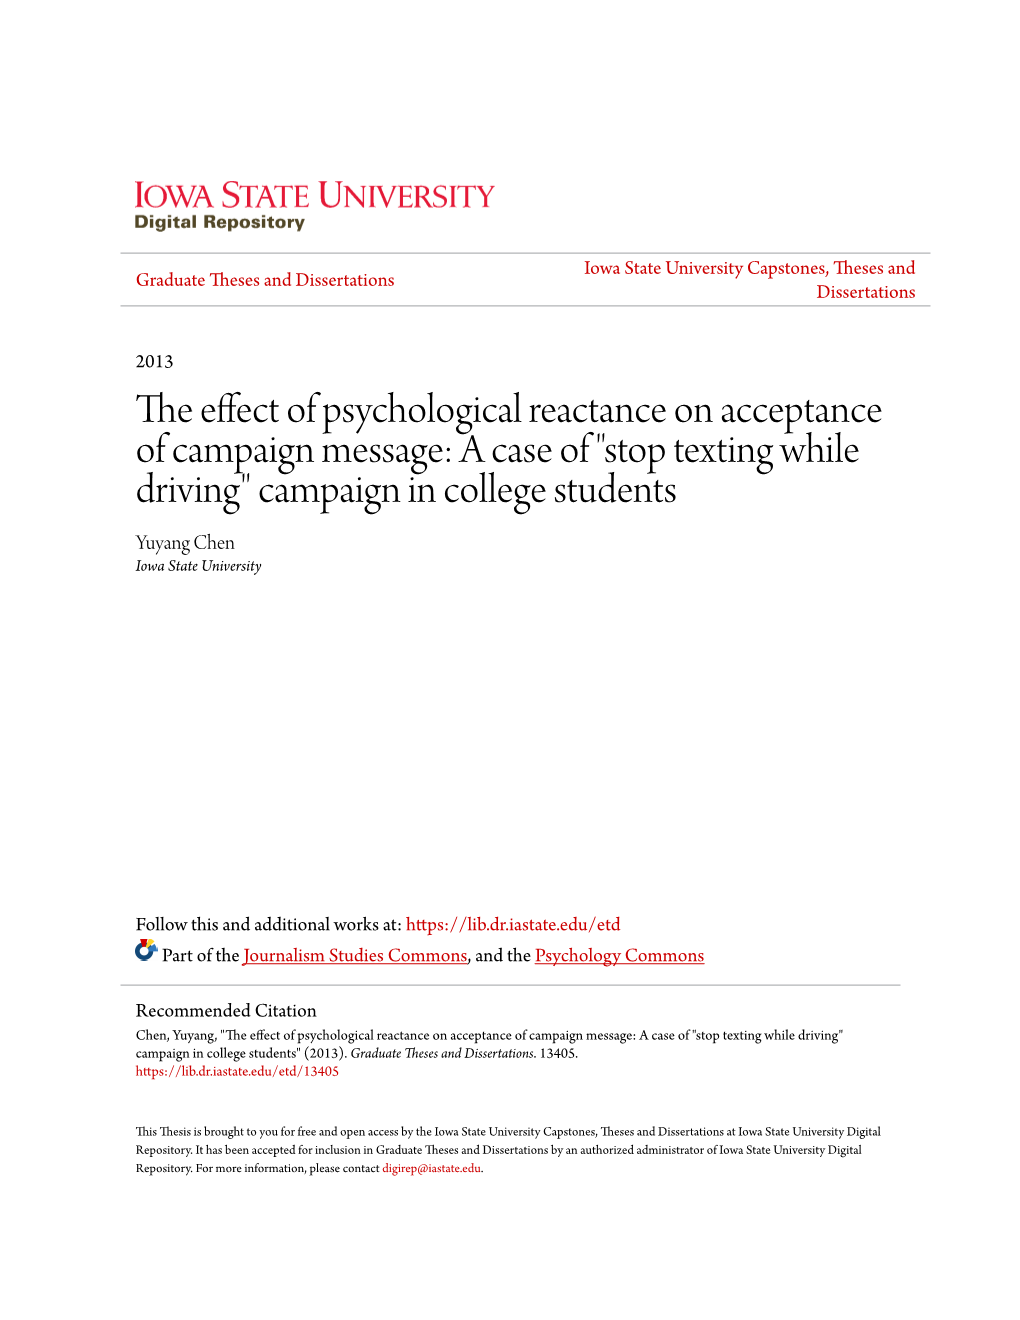 The Effect of Psychological Reactance on Acceptance of Campaign Message